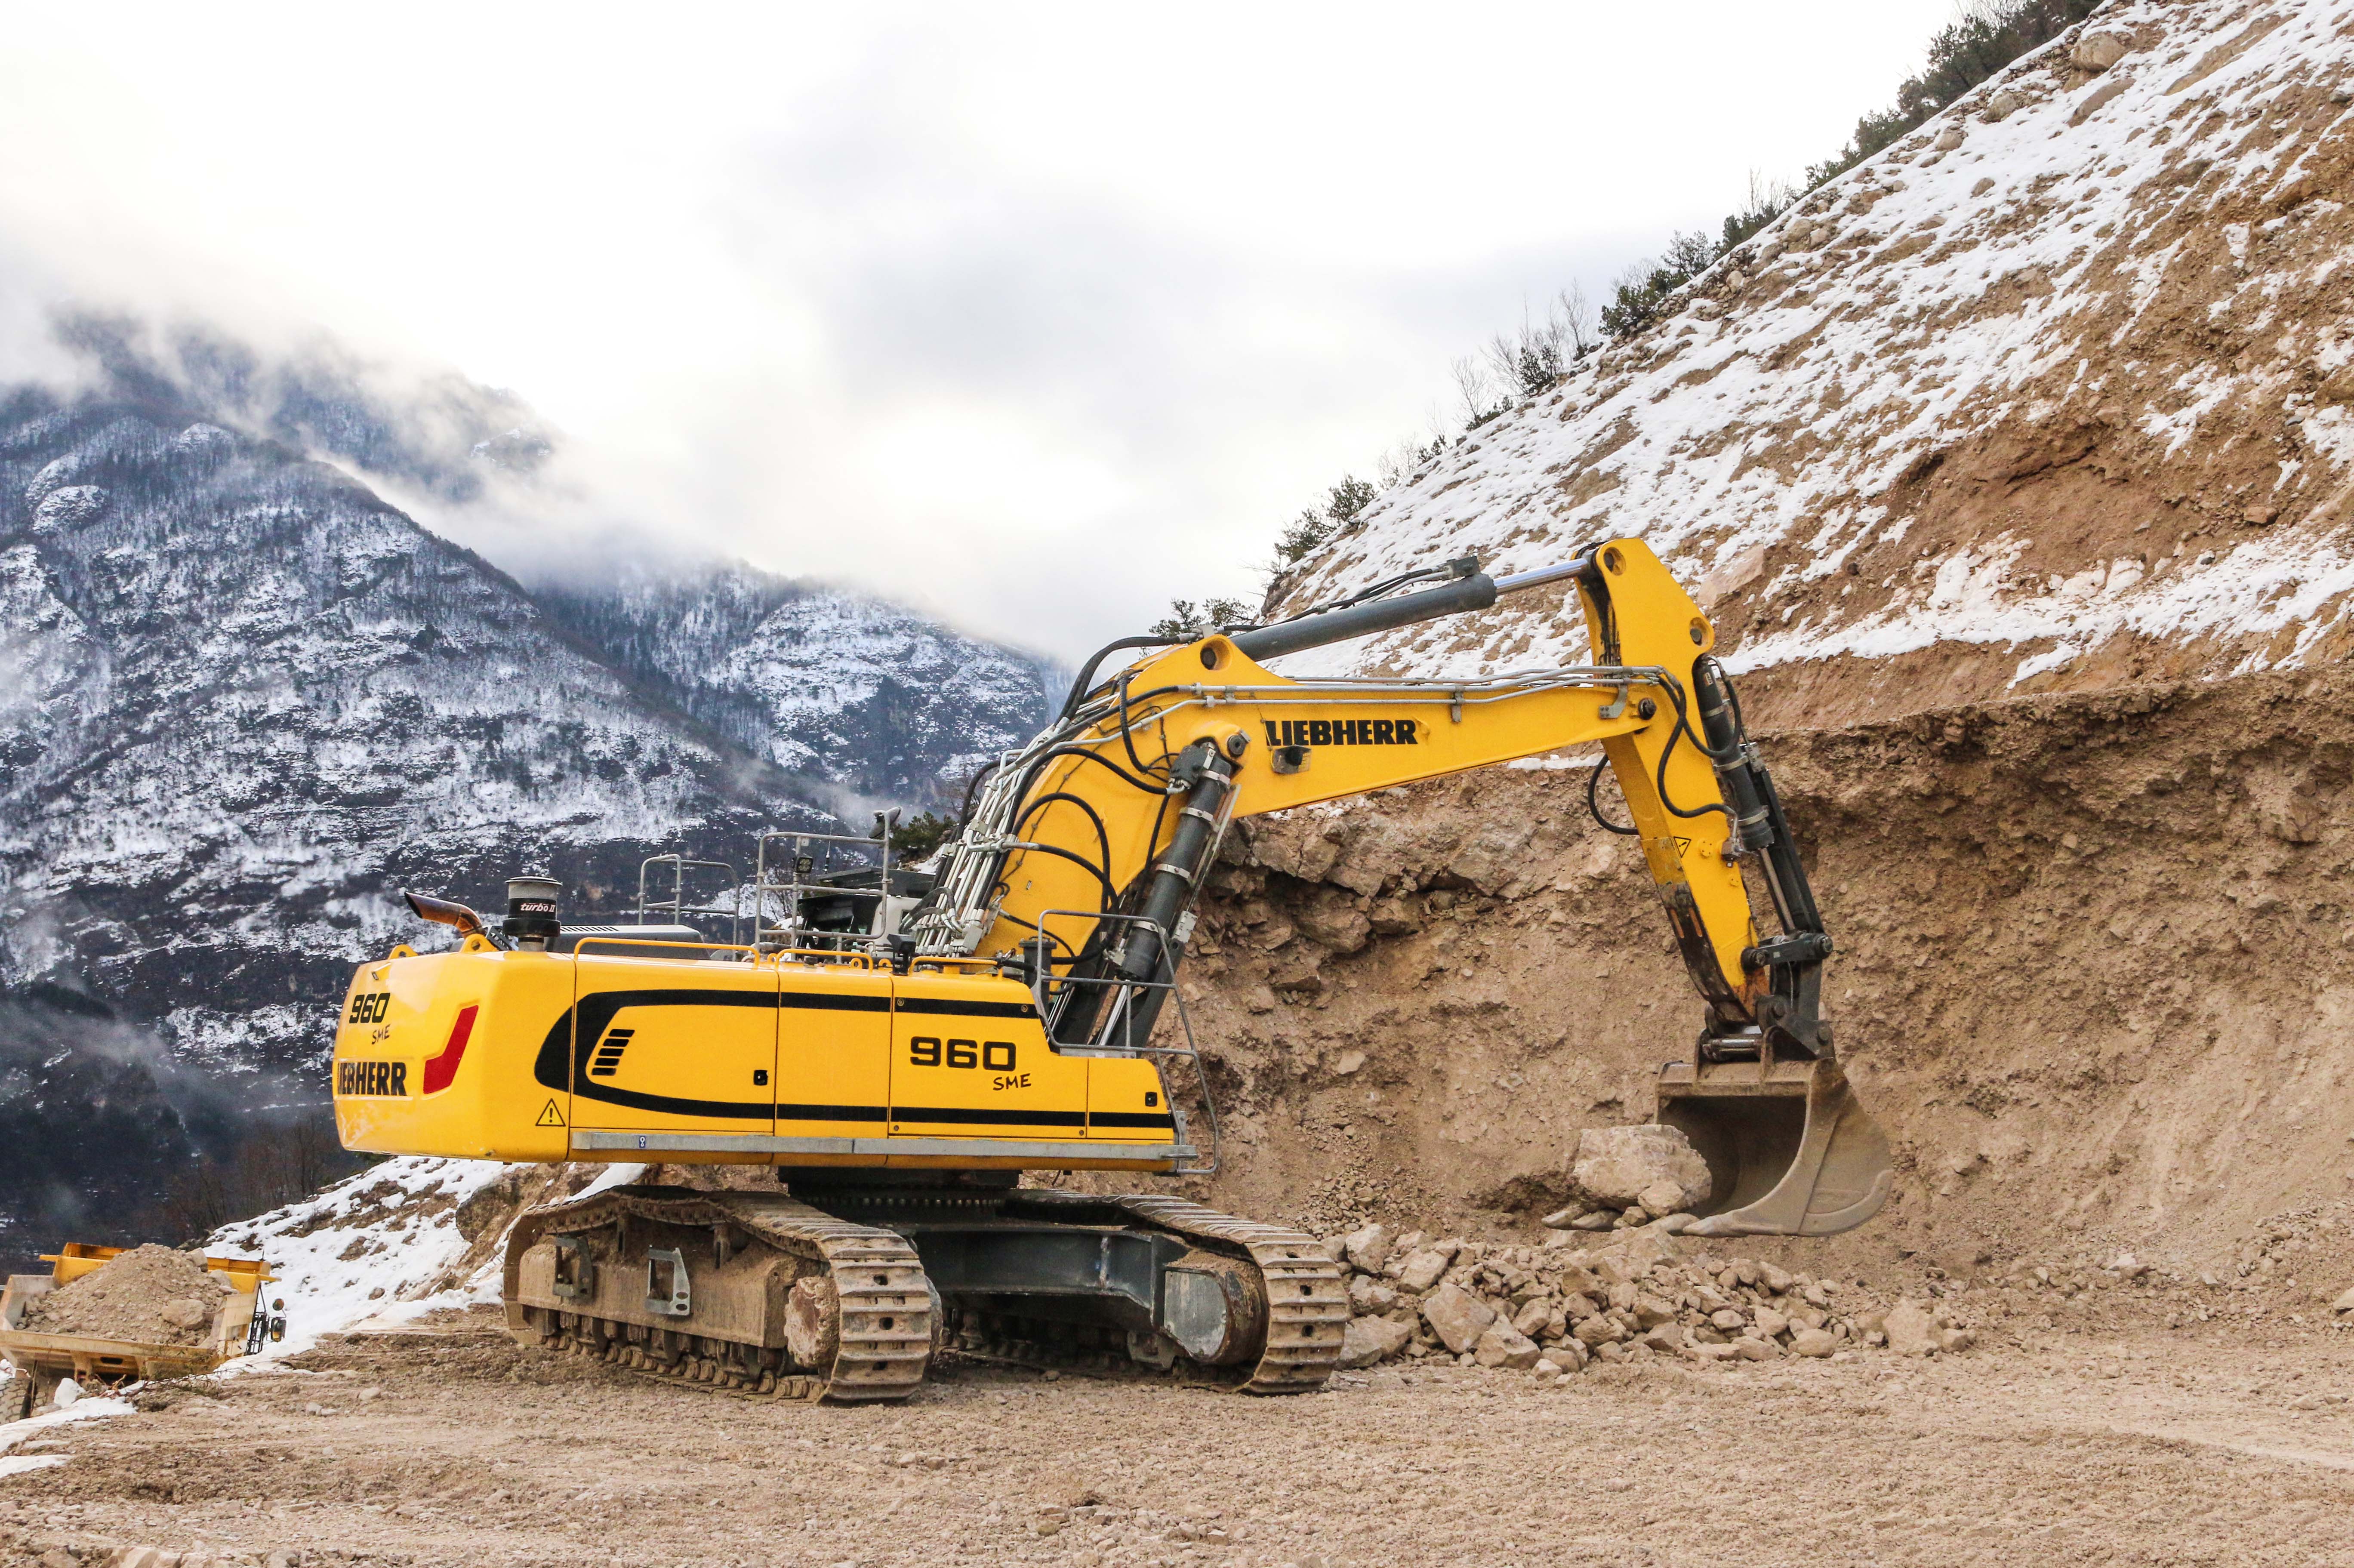 The R 960 SME crawler excavator has proven itself in quarries and mining operations around the world since 2012.